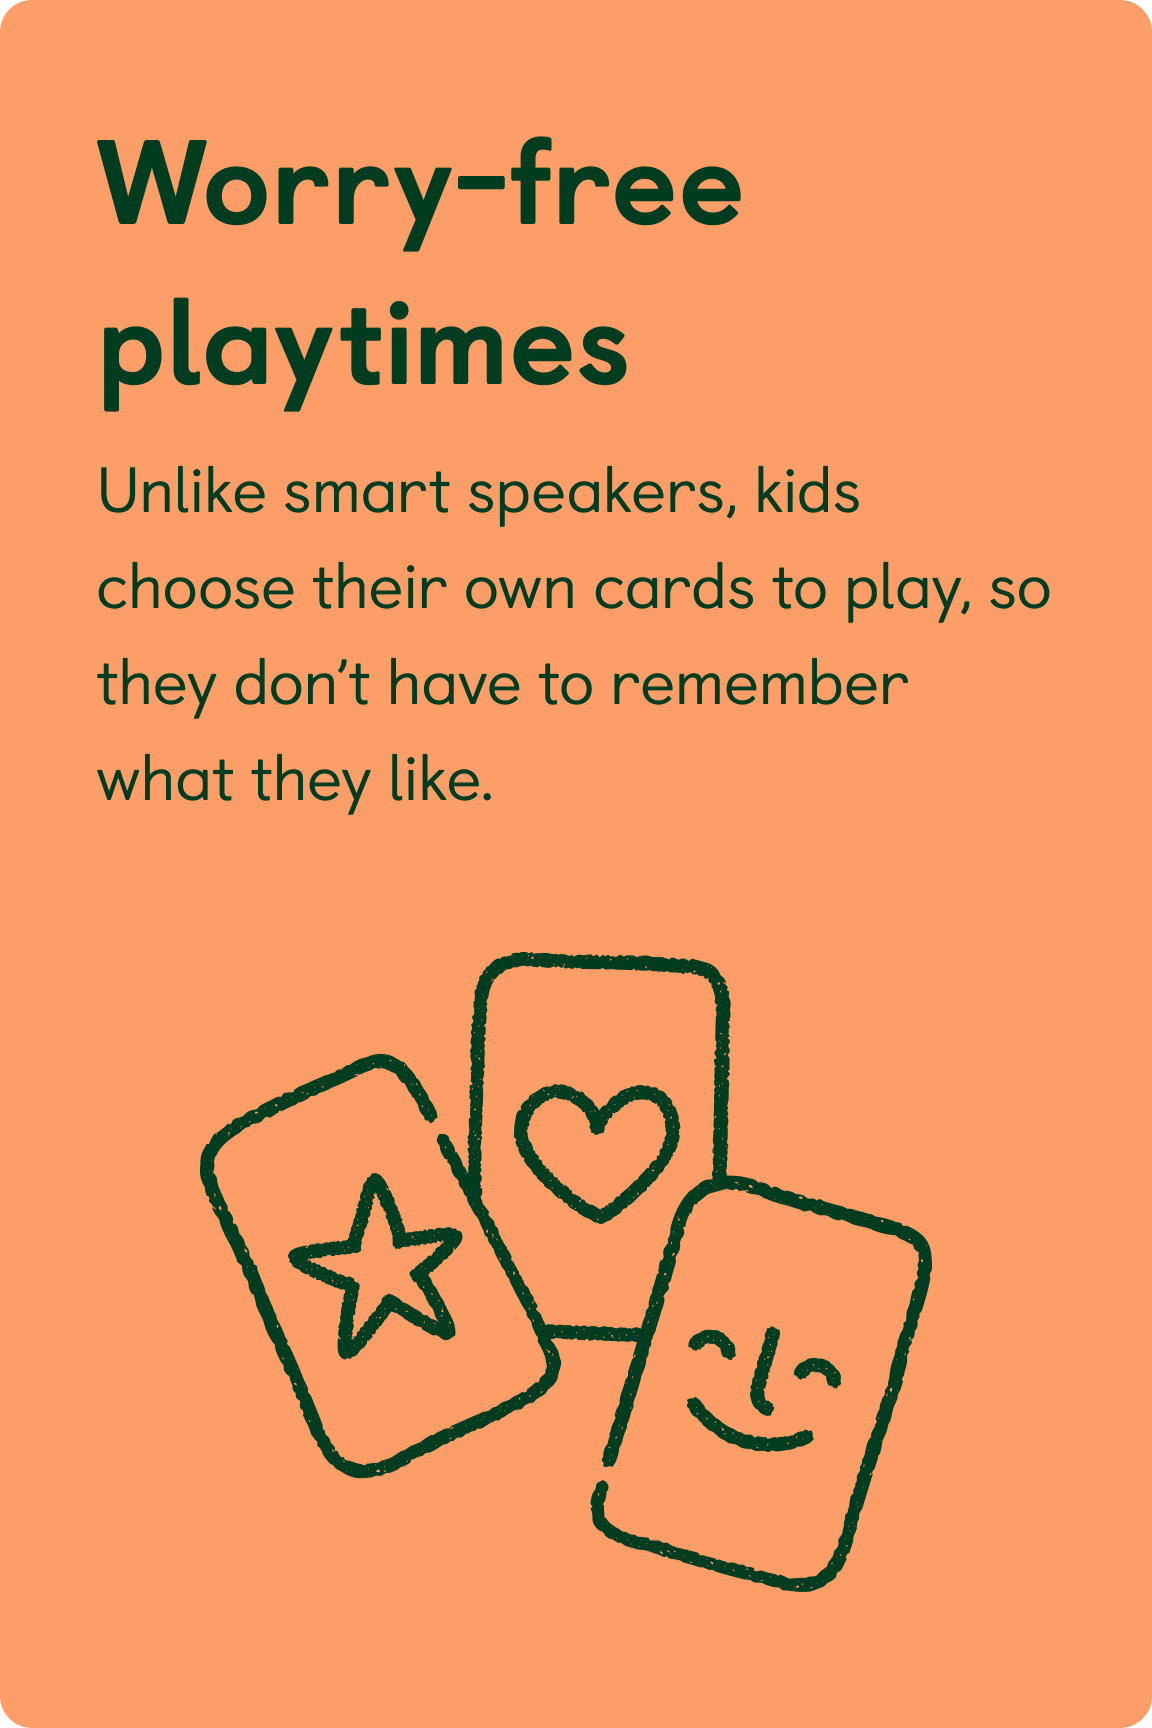 Worry-free playtimes. Unlike smart speakers, kids choose their own cards to play, so they don’t have to remember what they like.